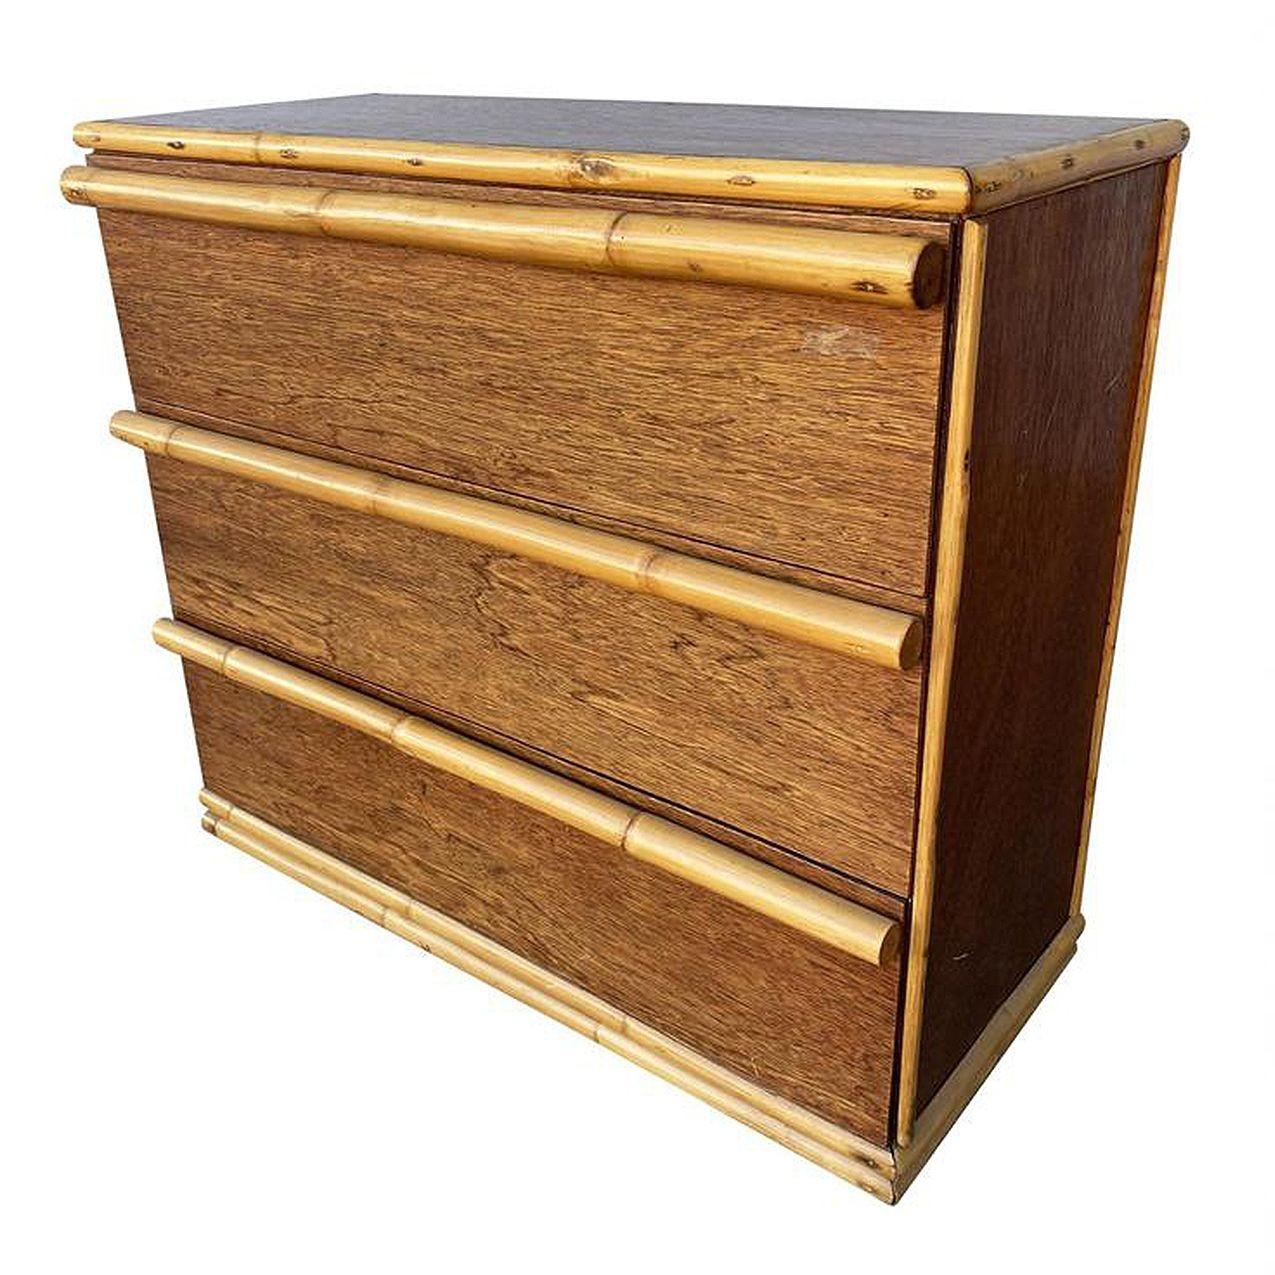 Restored Post War mahogany lowboy dresser with large full-length rattan pulls along each drawer and stacked rattan base.
1950, United States
Restored to new for you.
We only purchase and sell only the best and finest rattan furniture made by the